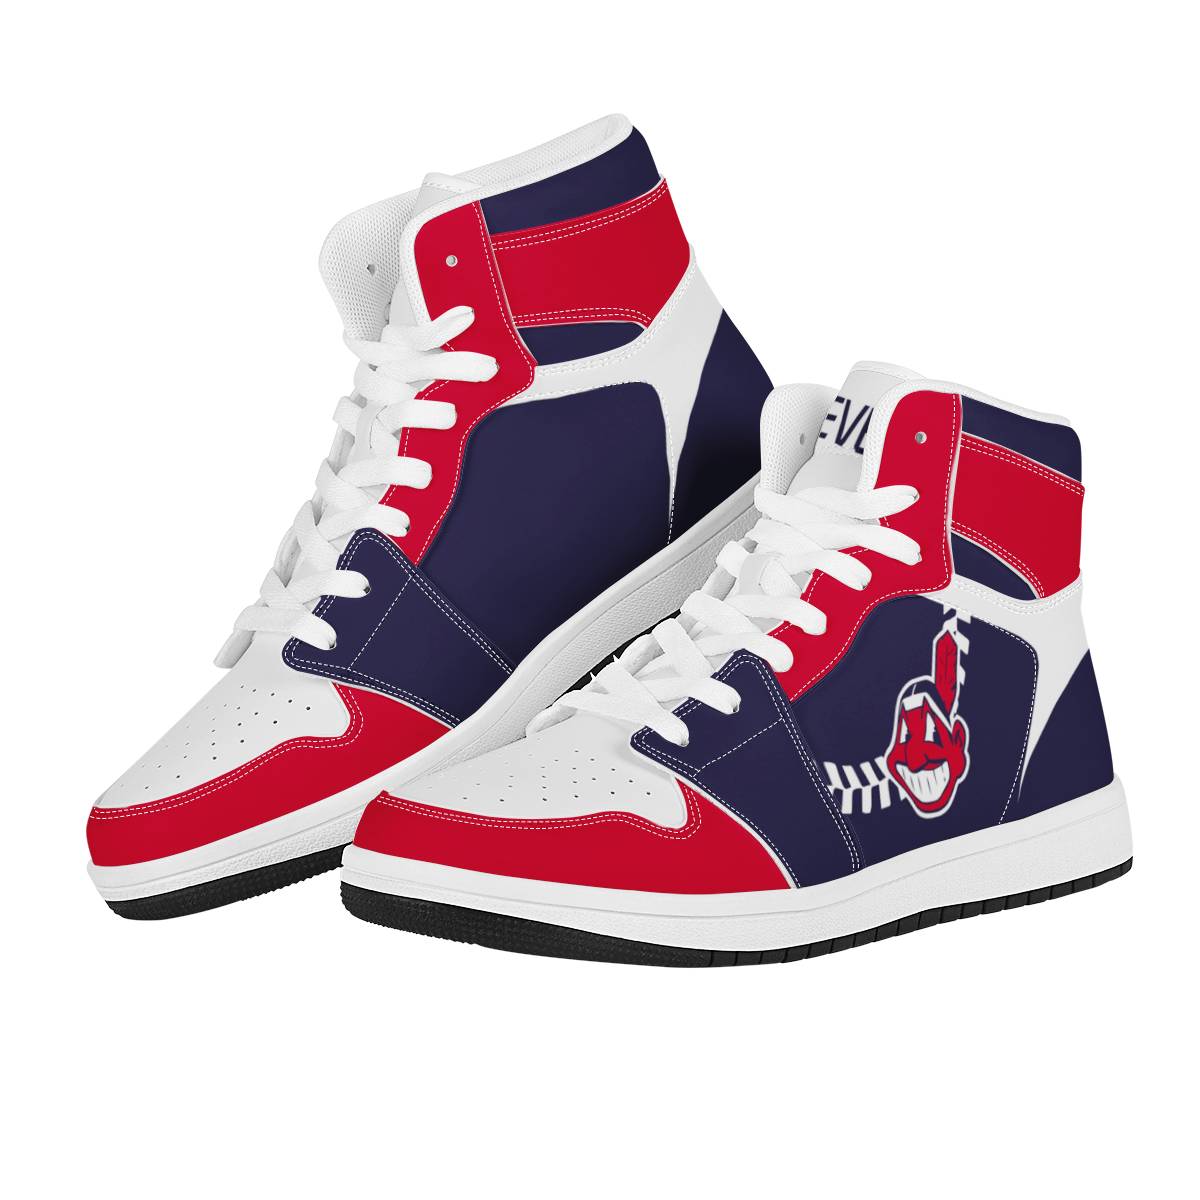 Men's Cleveland Indians High Top Leather AJ1 Sneakers 001